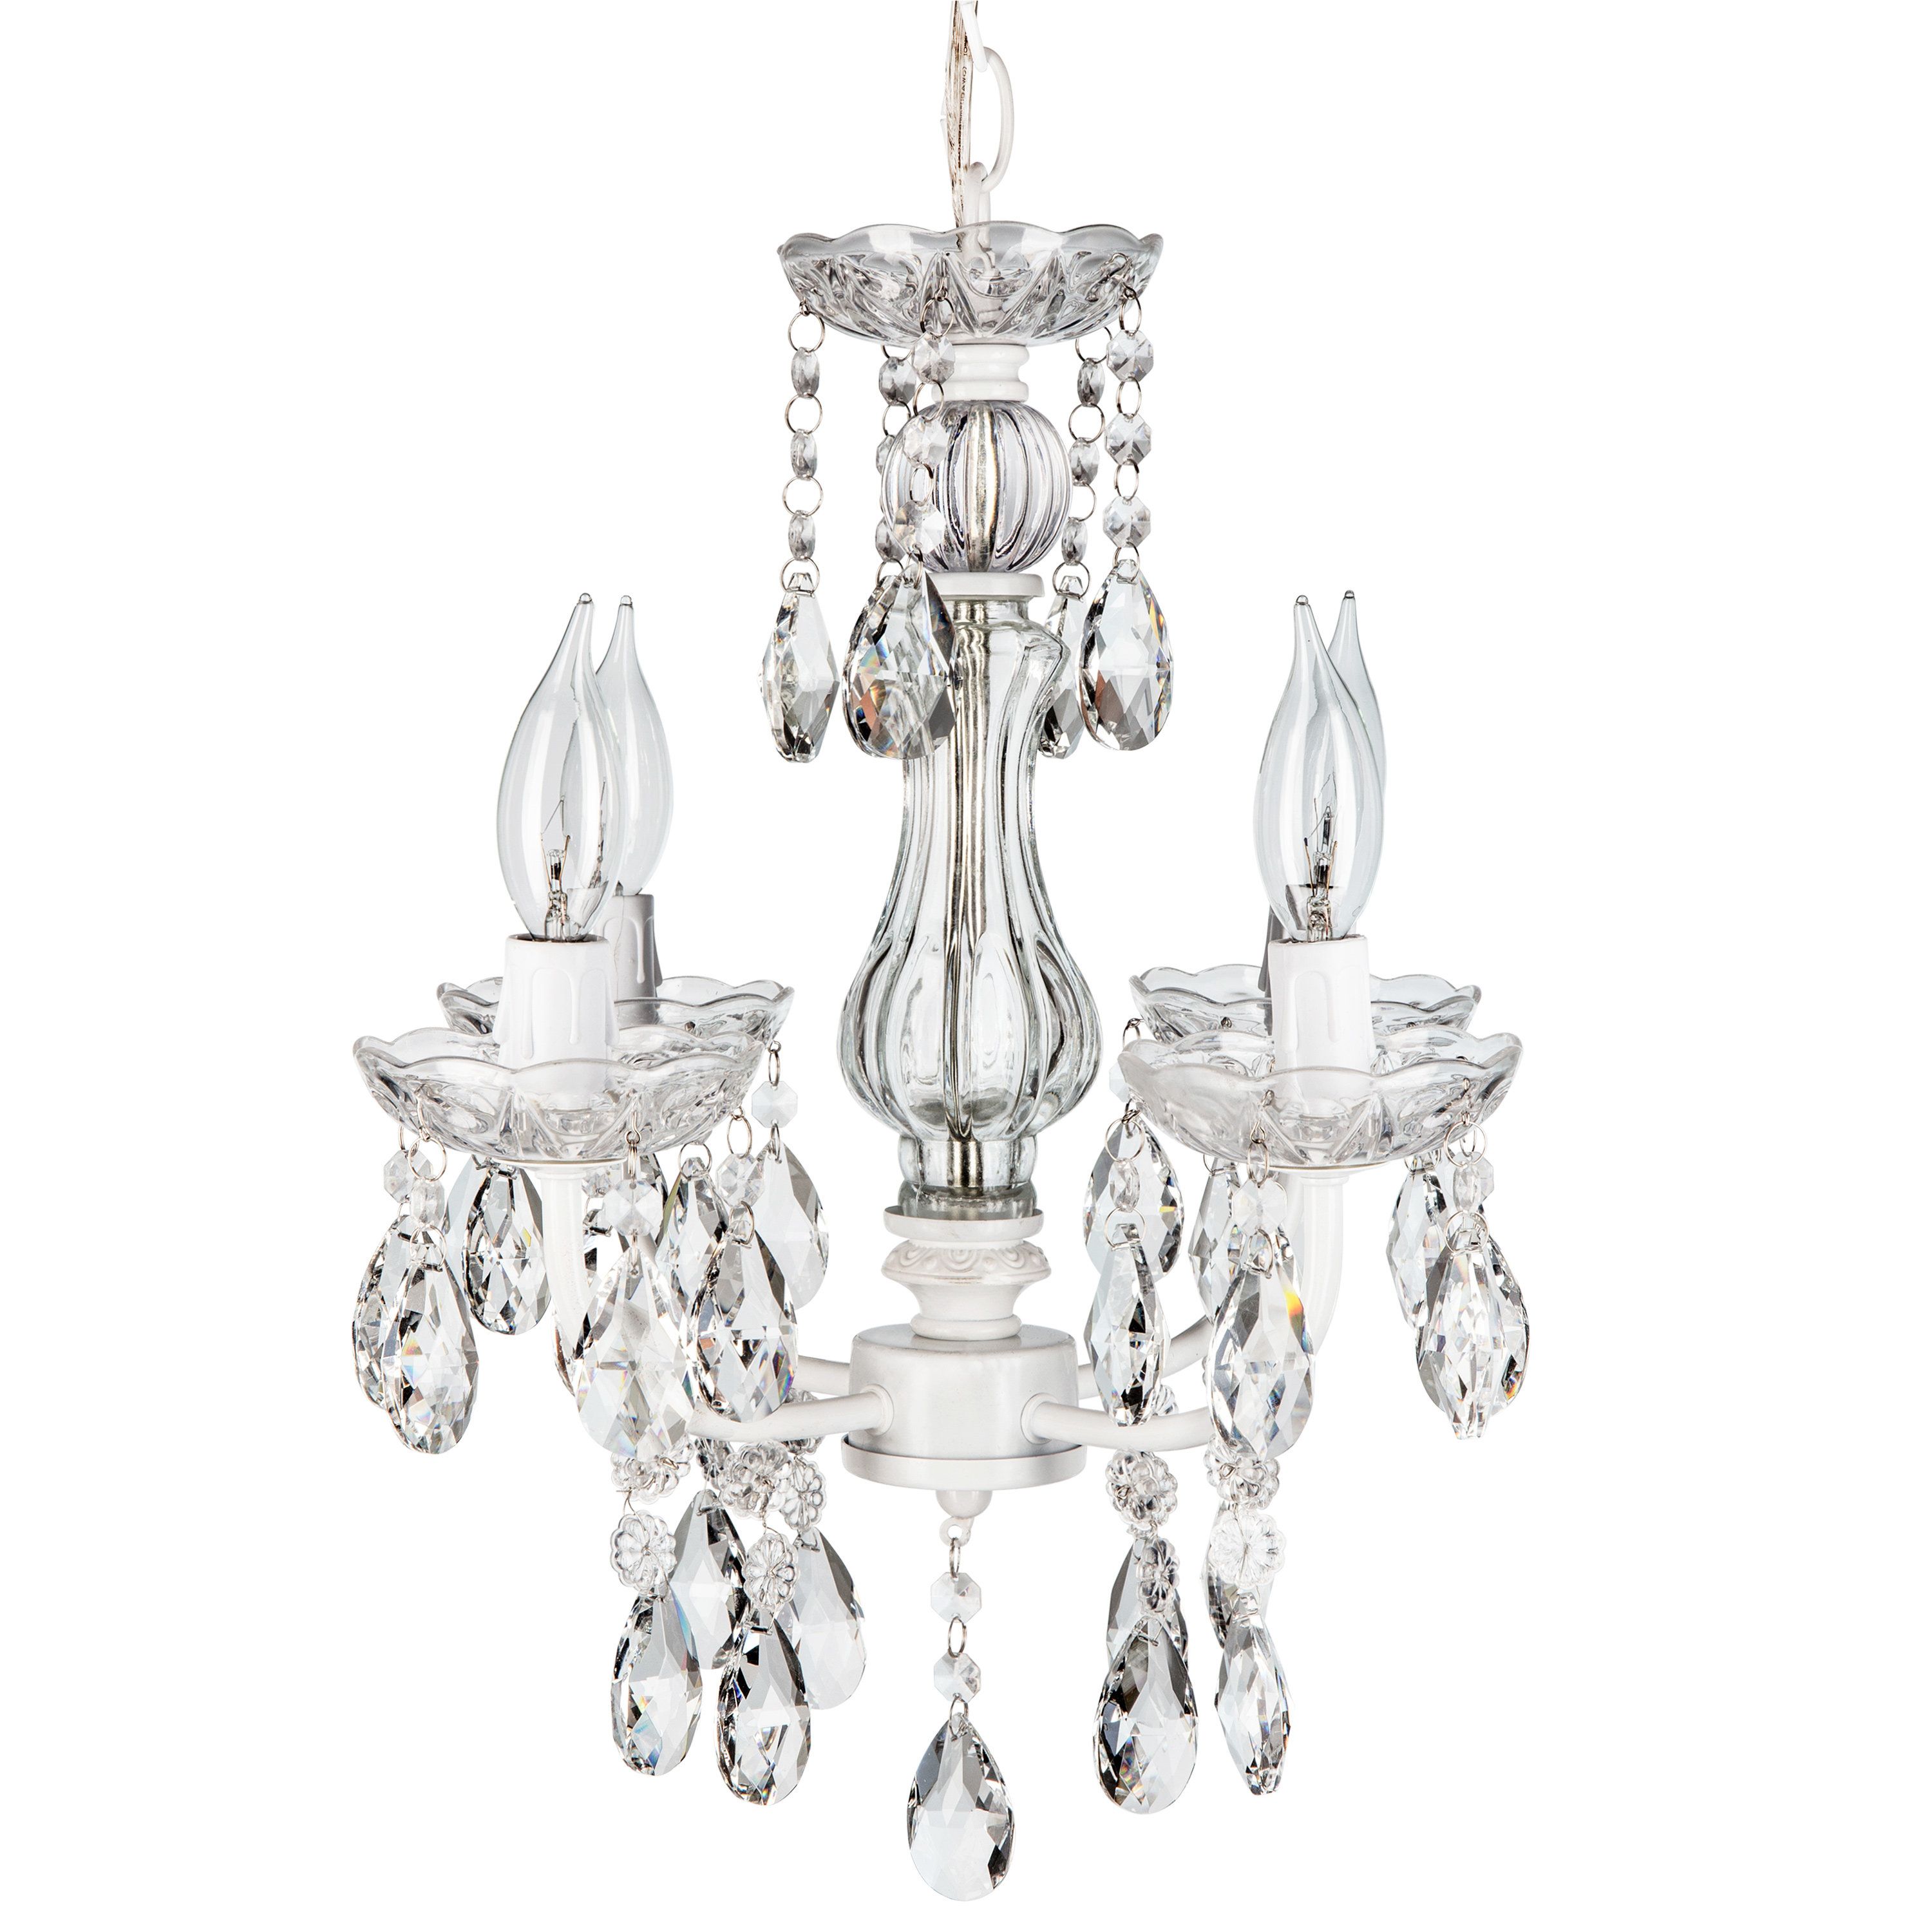 Blanchette White 4 Light Candle Style Chandelier With Regard To Blanchette 5 Light Candle Style Chandeliers (Photo 4 of 30)